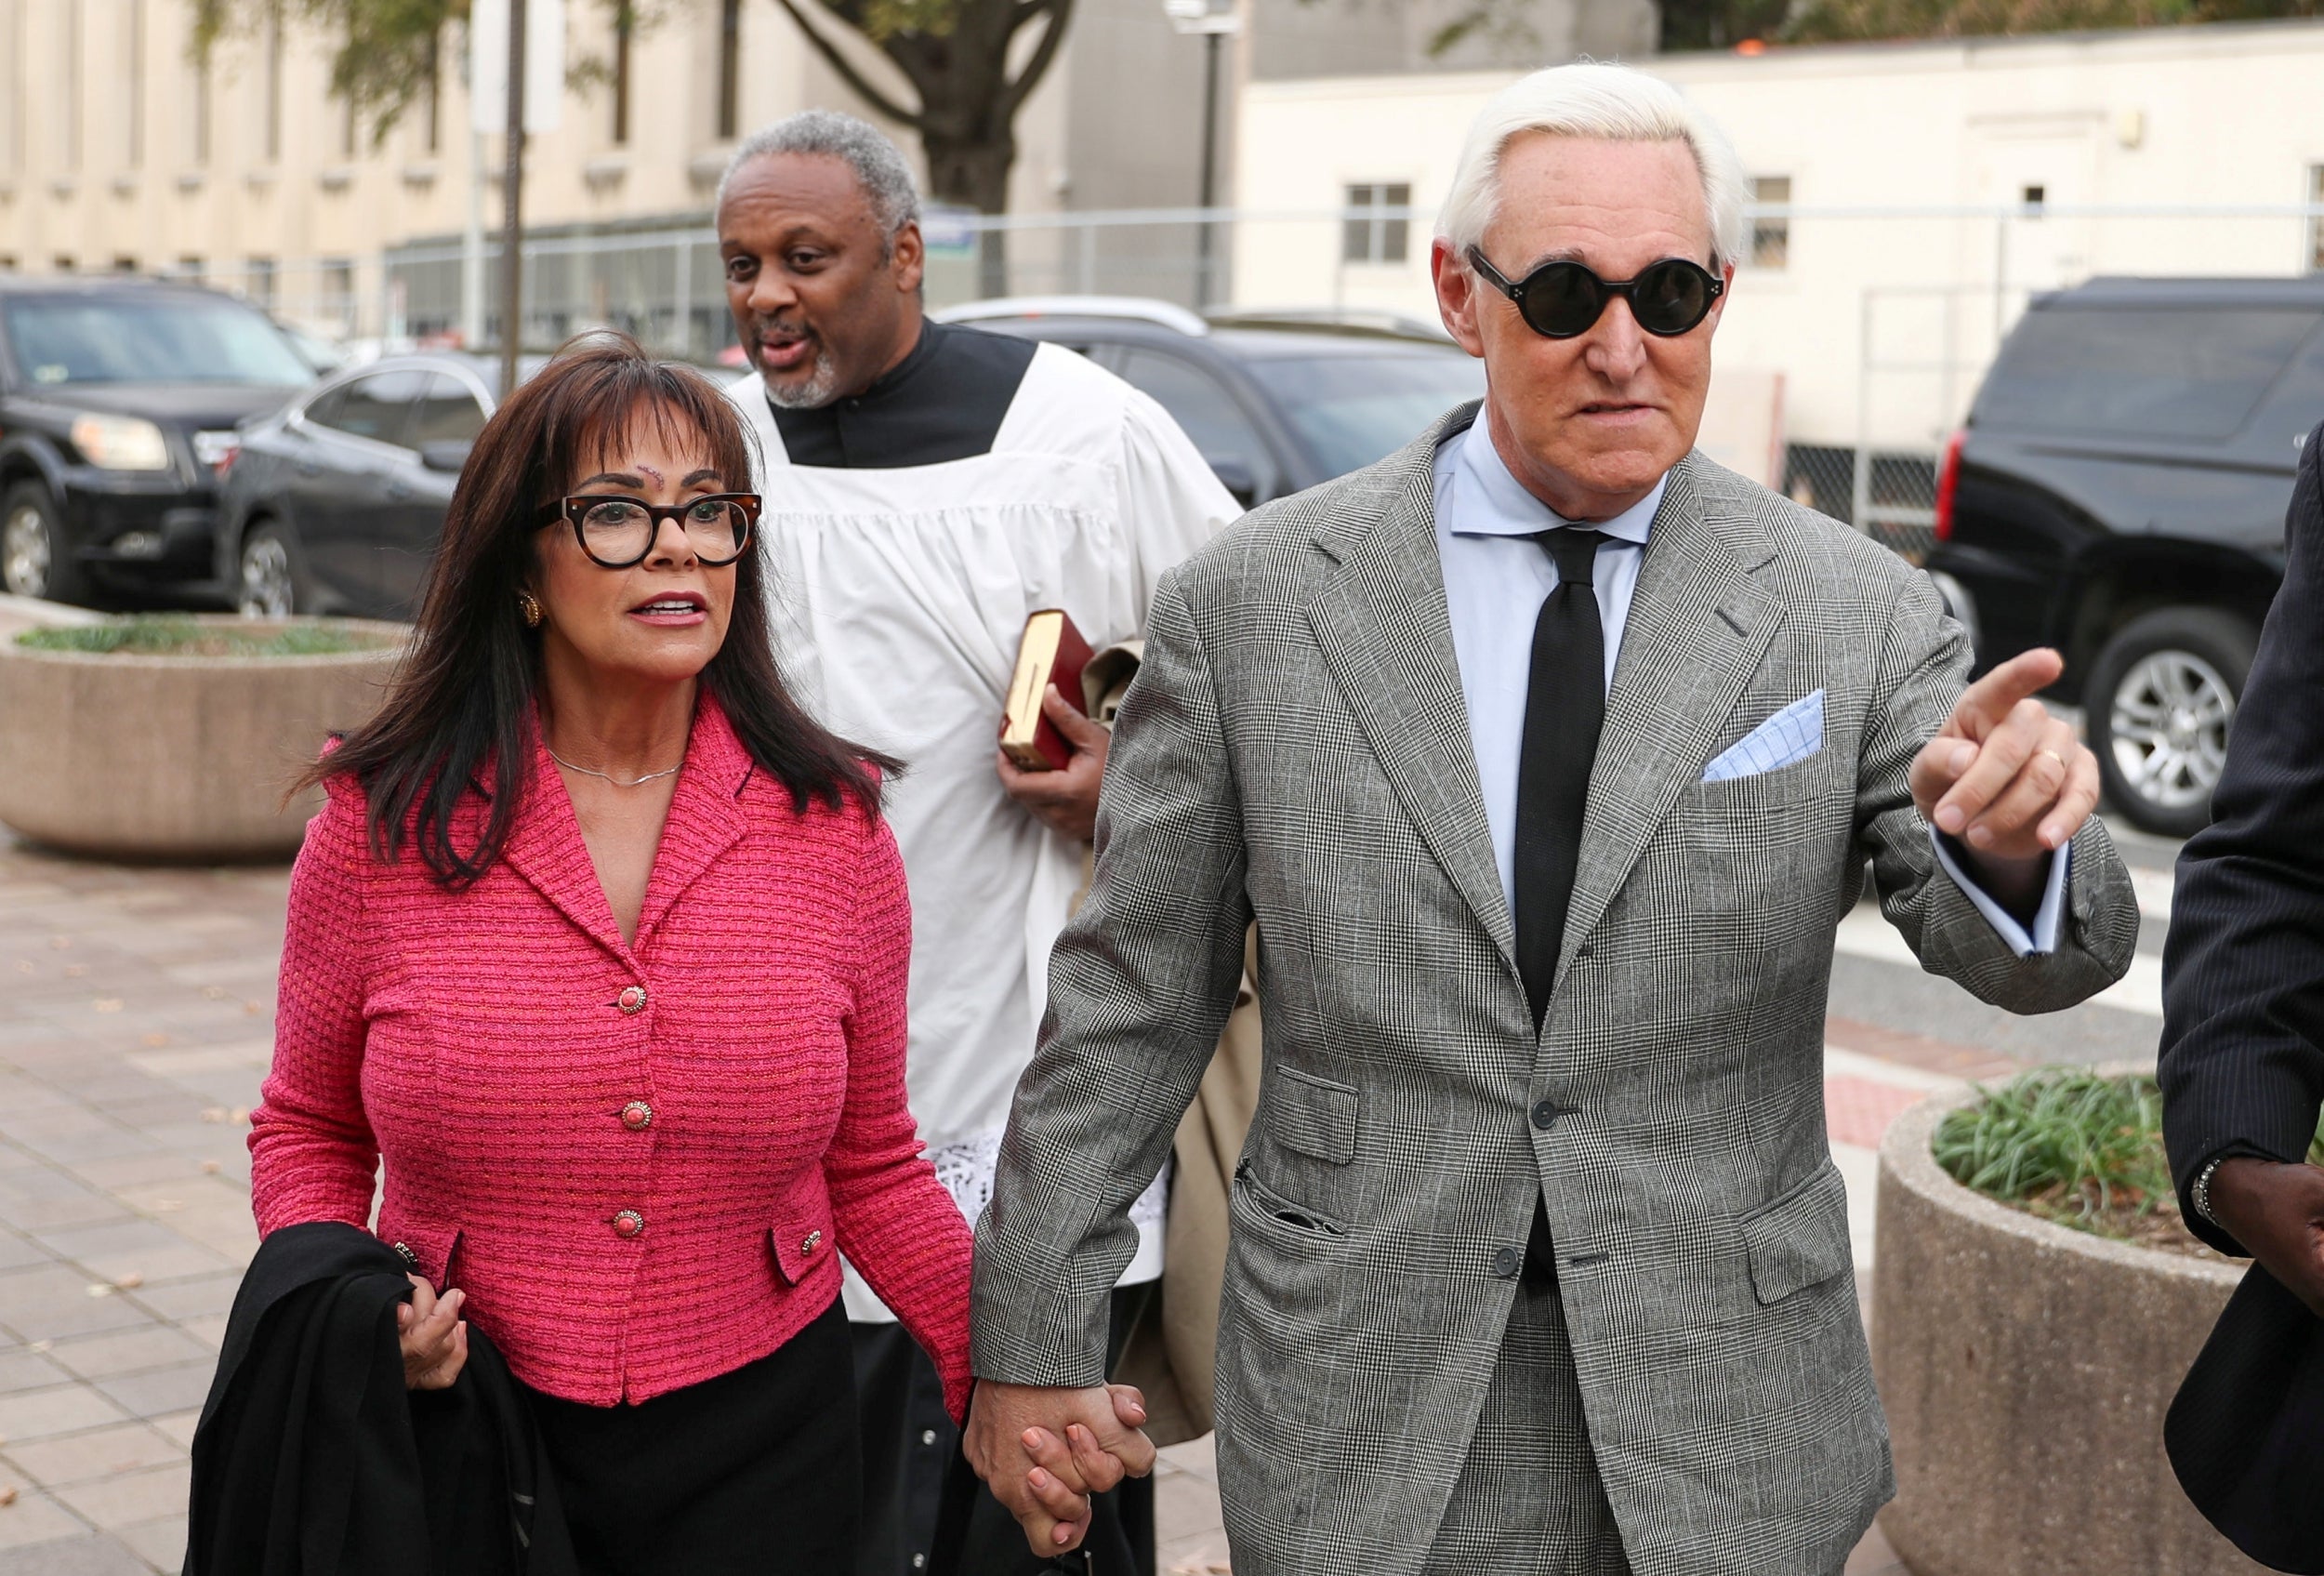 Roger Stone arrives for the continuation of his trial on charges of lying to Congress, obstructing justice and witness tampering in Washington DC